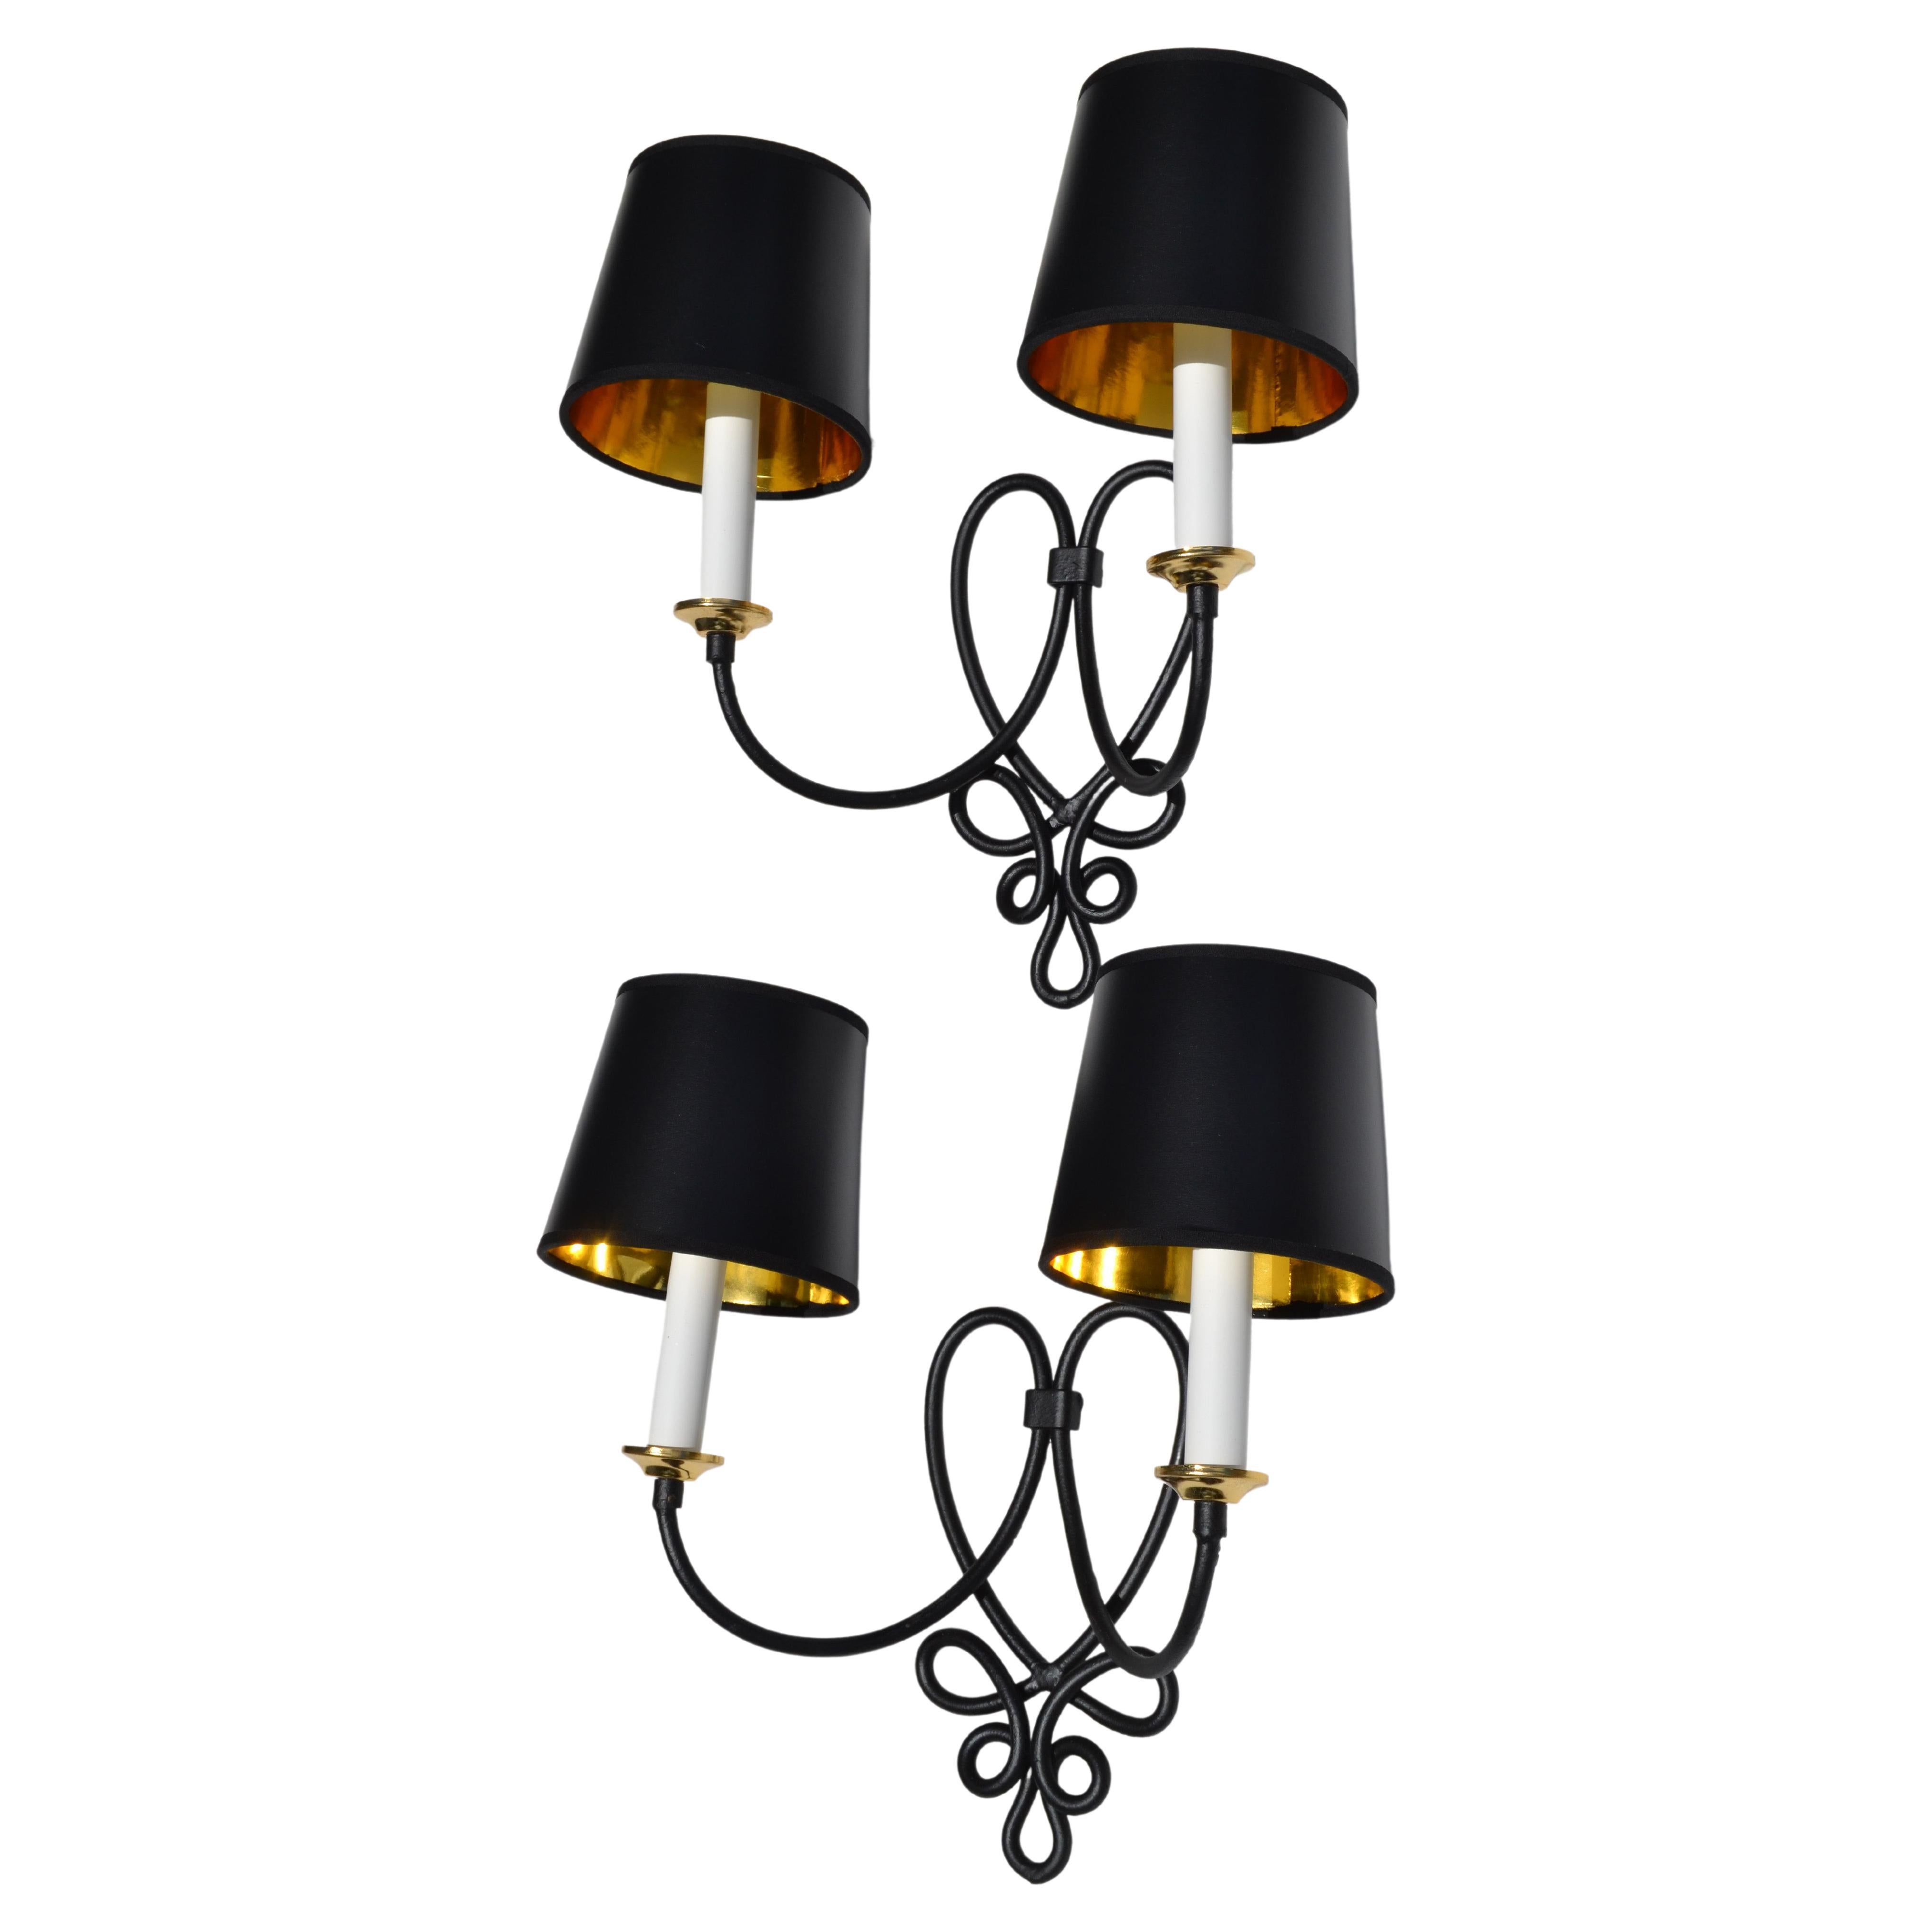 Art Deco Pair, Rene Prou French 2 Lights Wrought Iron & Brass Wall Sconces Black Finish